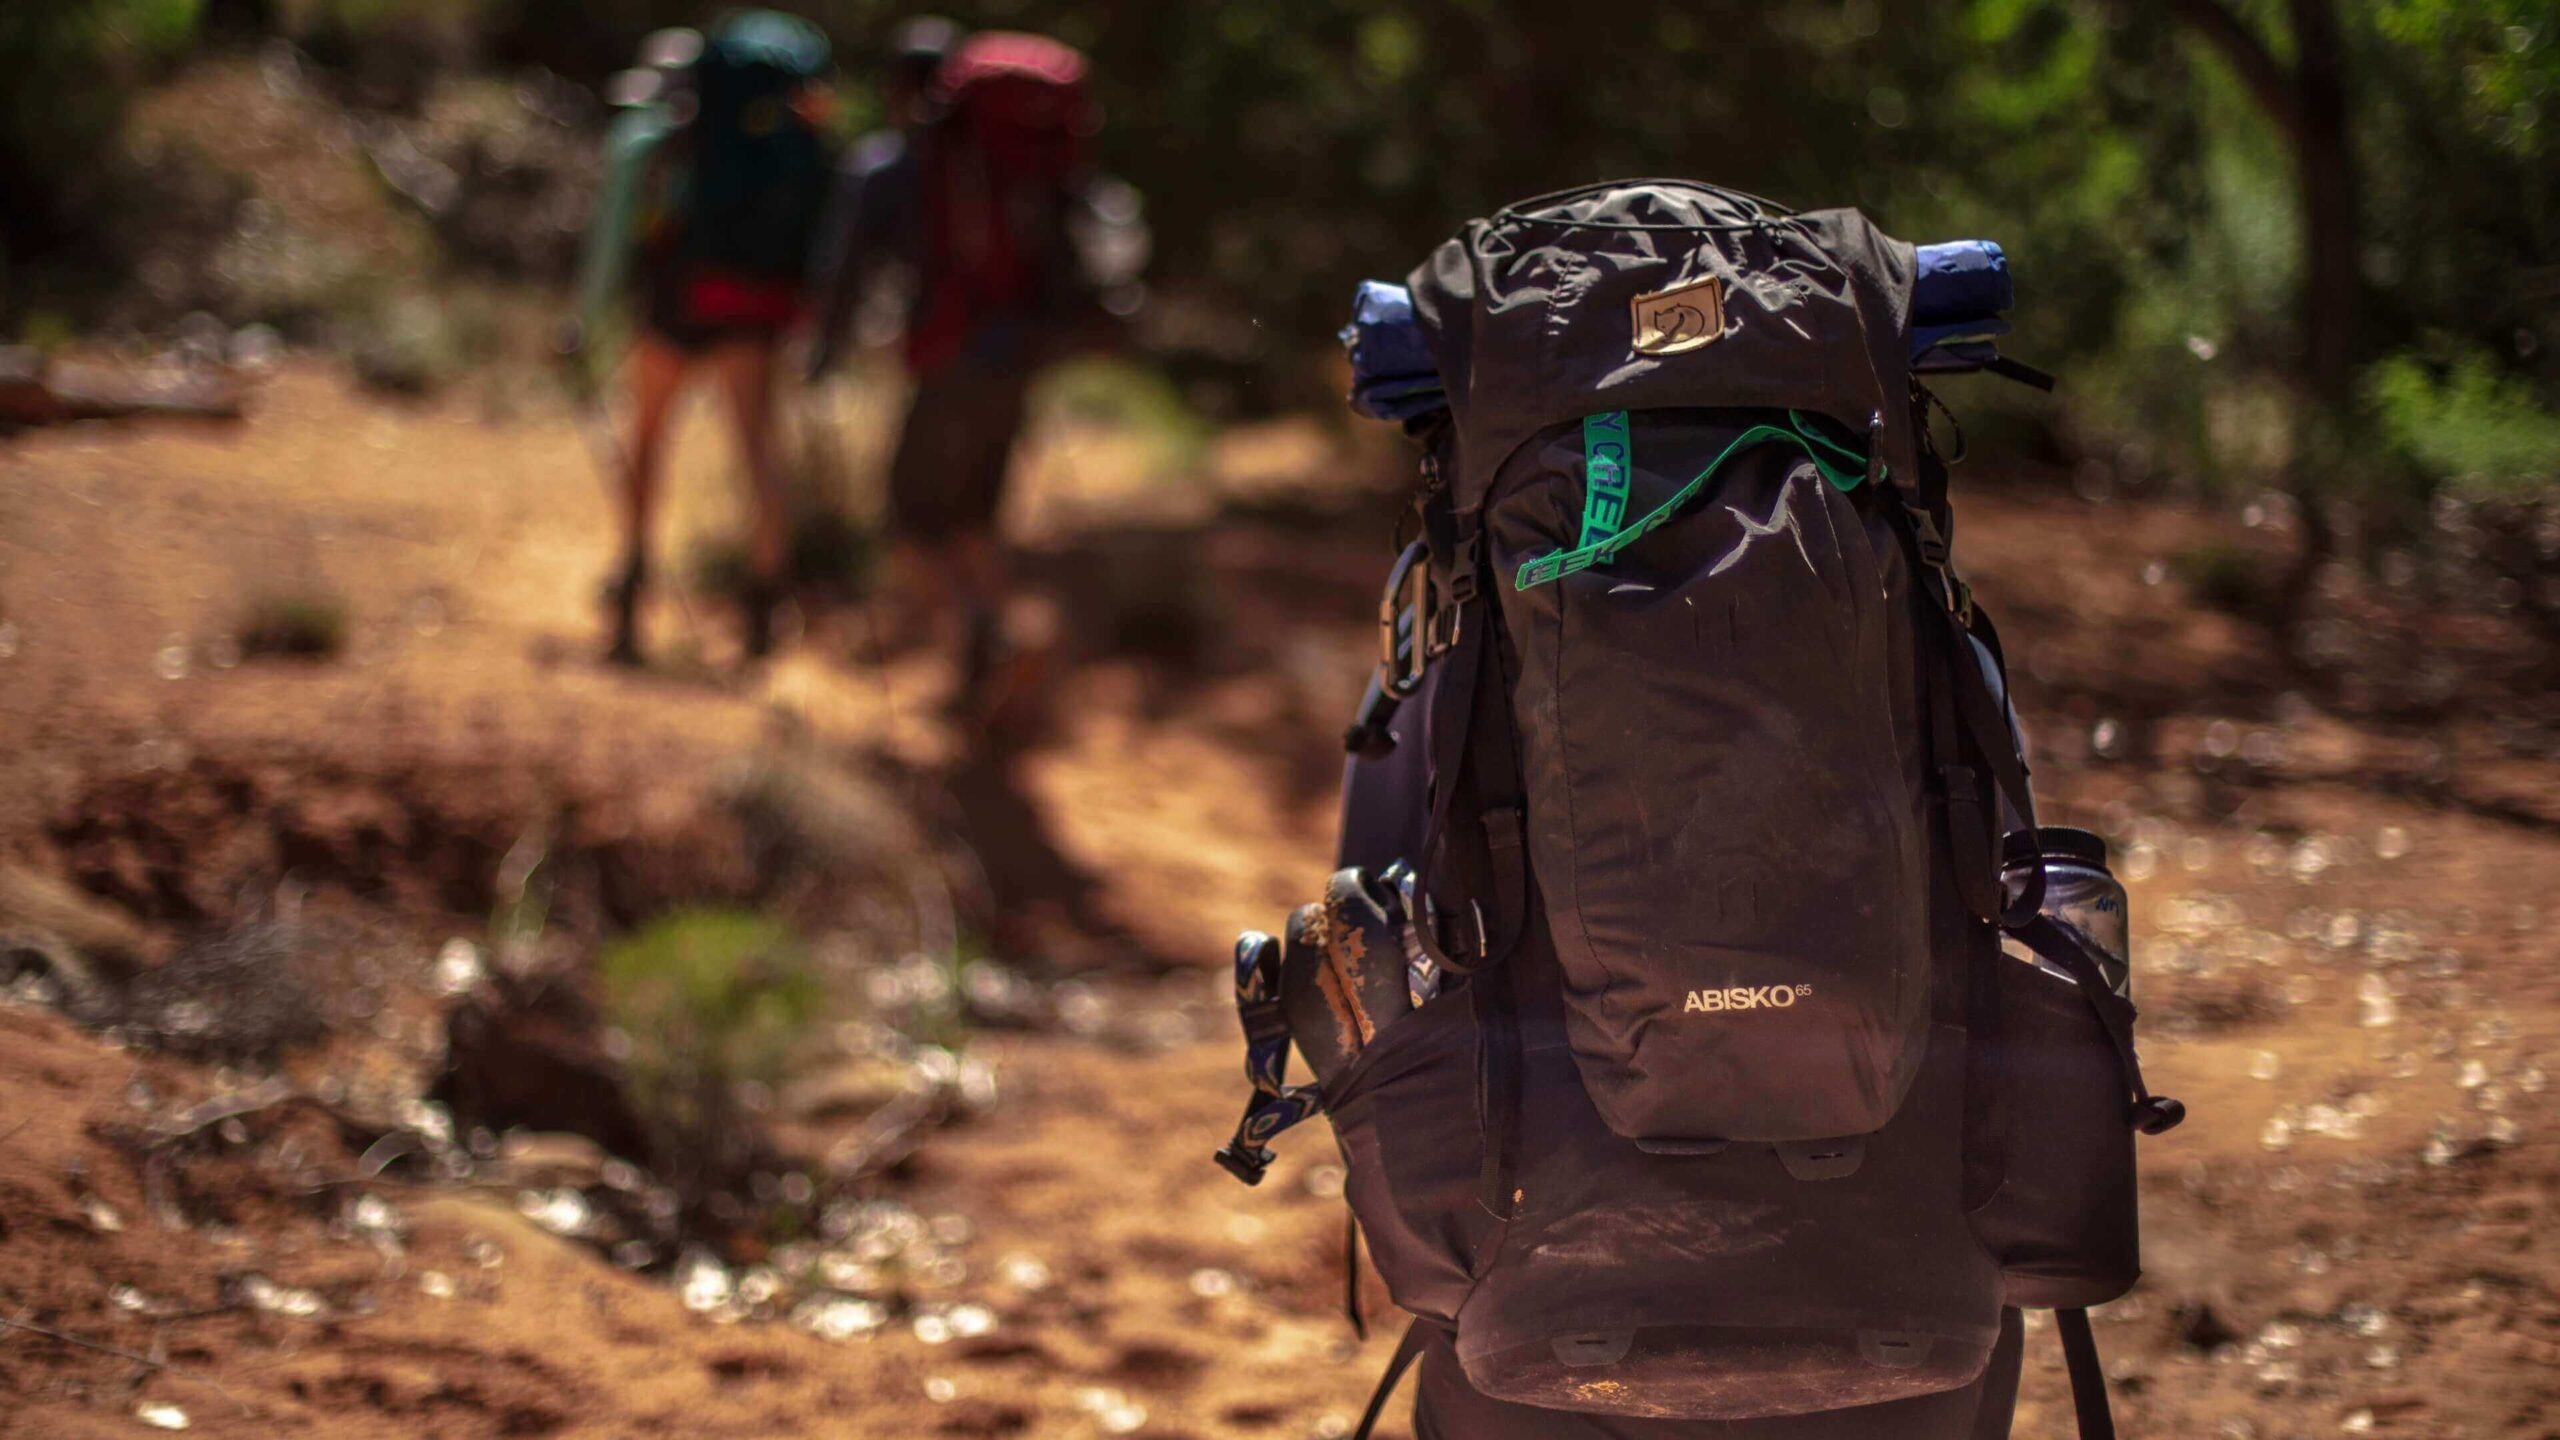 Backpacking: An equipped backpack for a long-time group journey, Survival gear. 2560x1440 HD Wallpaper.